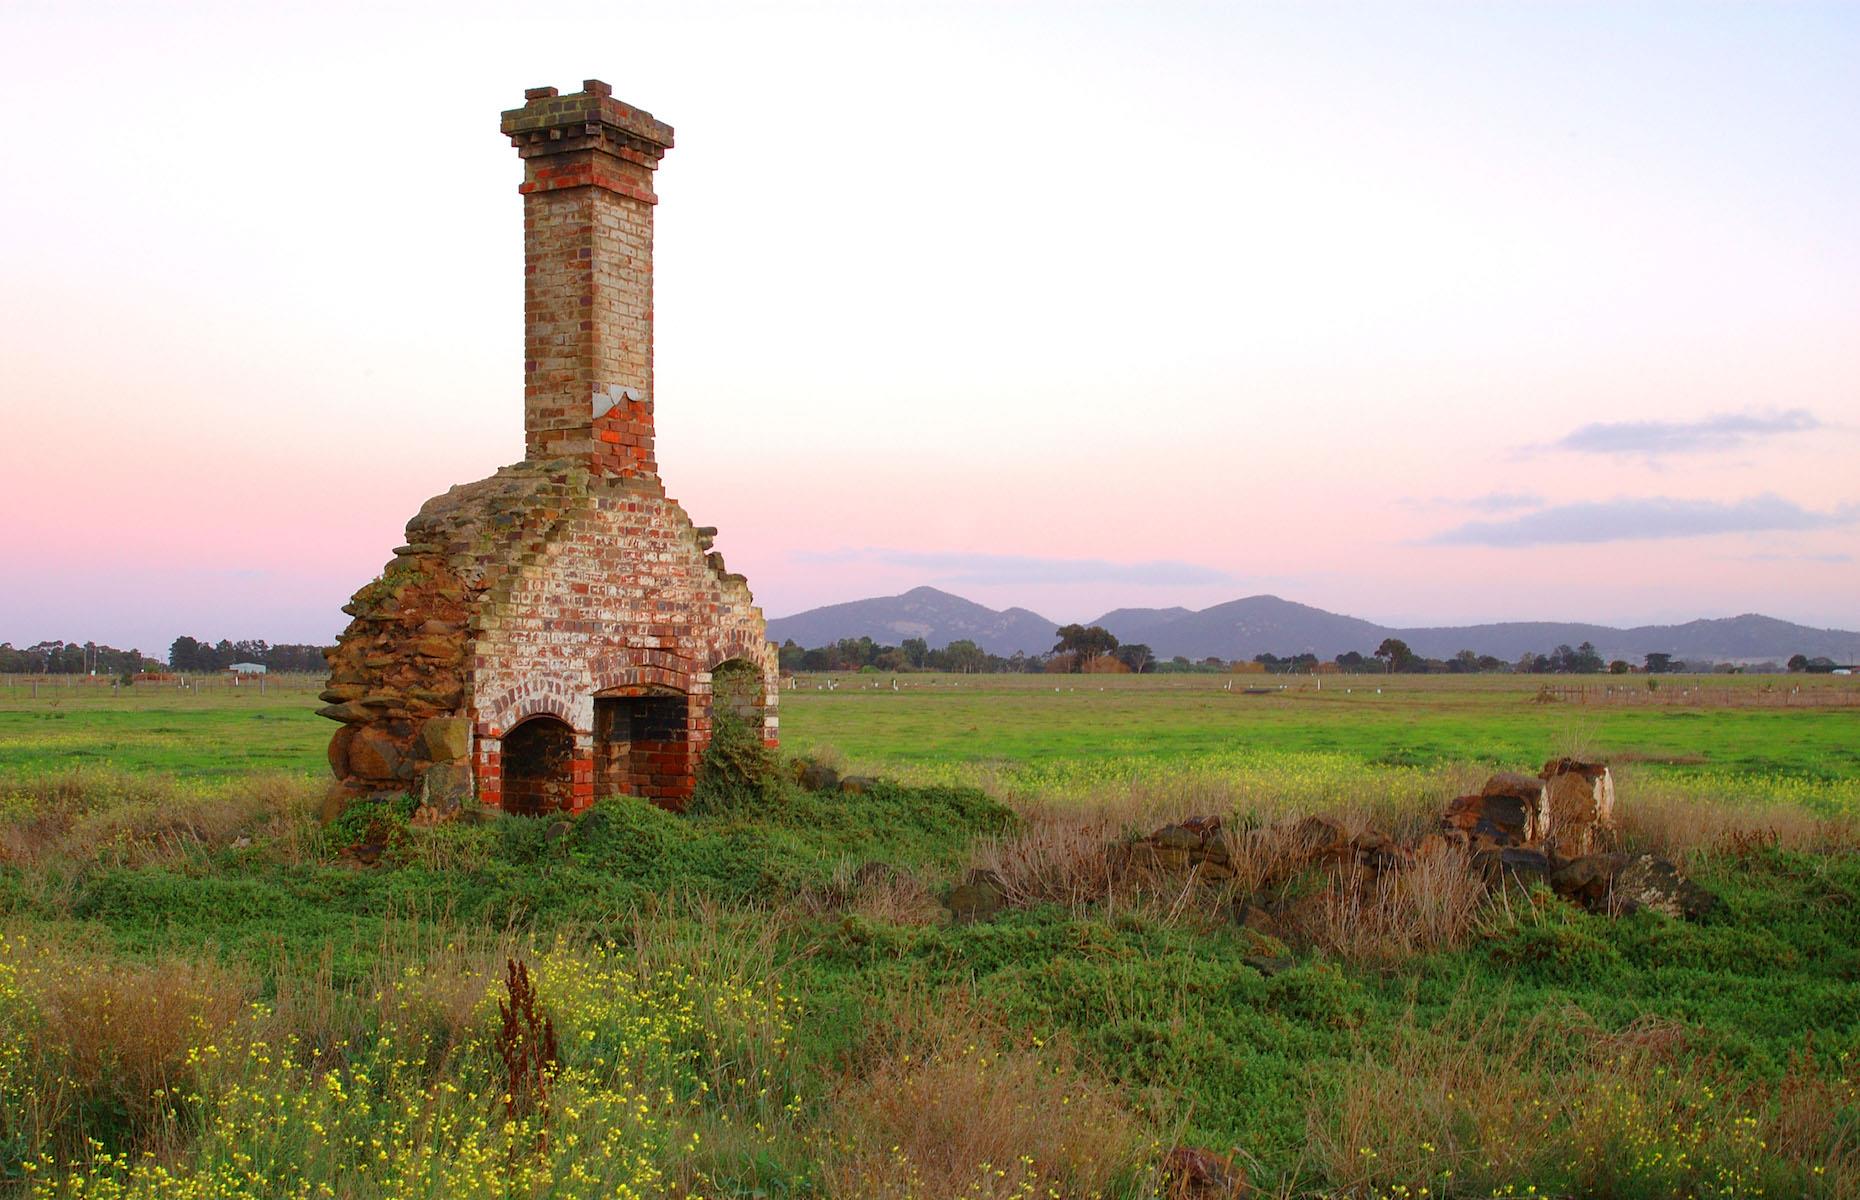 <p>The ruins of the old Rothwell Inn are a striking sight, silhouetted against a backdrop of the You Yangs in southern Victoria. What remains of the 19th-century inn can be seen by the banks of the river on the overland track between Geelong and Melbourne. Originally named the Travellers’ Rest, the public house was the start of the little rural settlement which began to grow up here in 1839.  </p>  <p><a href="https://www.loveexploring.com/galleries/90787/australias-eeriest-abandoned-towns-and-villages?page=1"><strong>Discover Australia's eeriest towns and villages</strong></a></p>